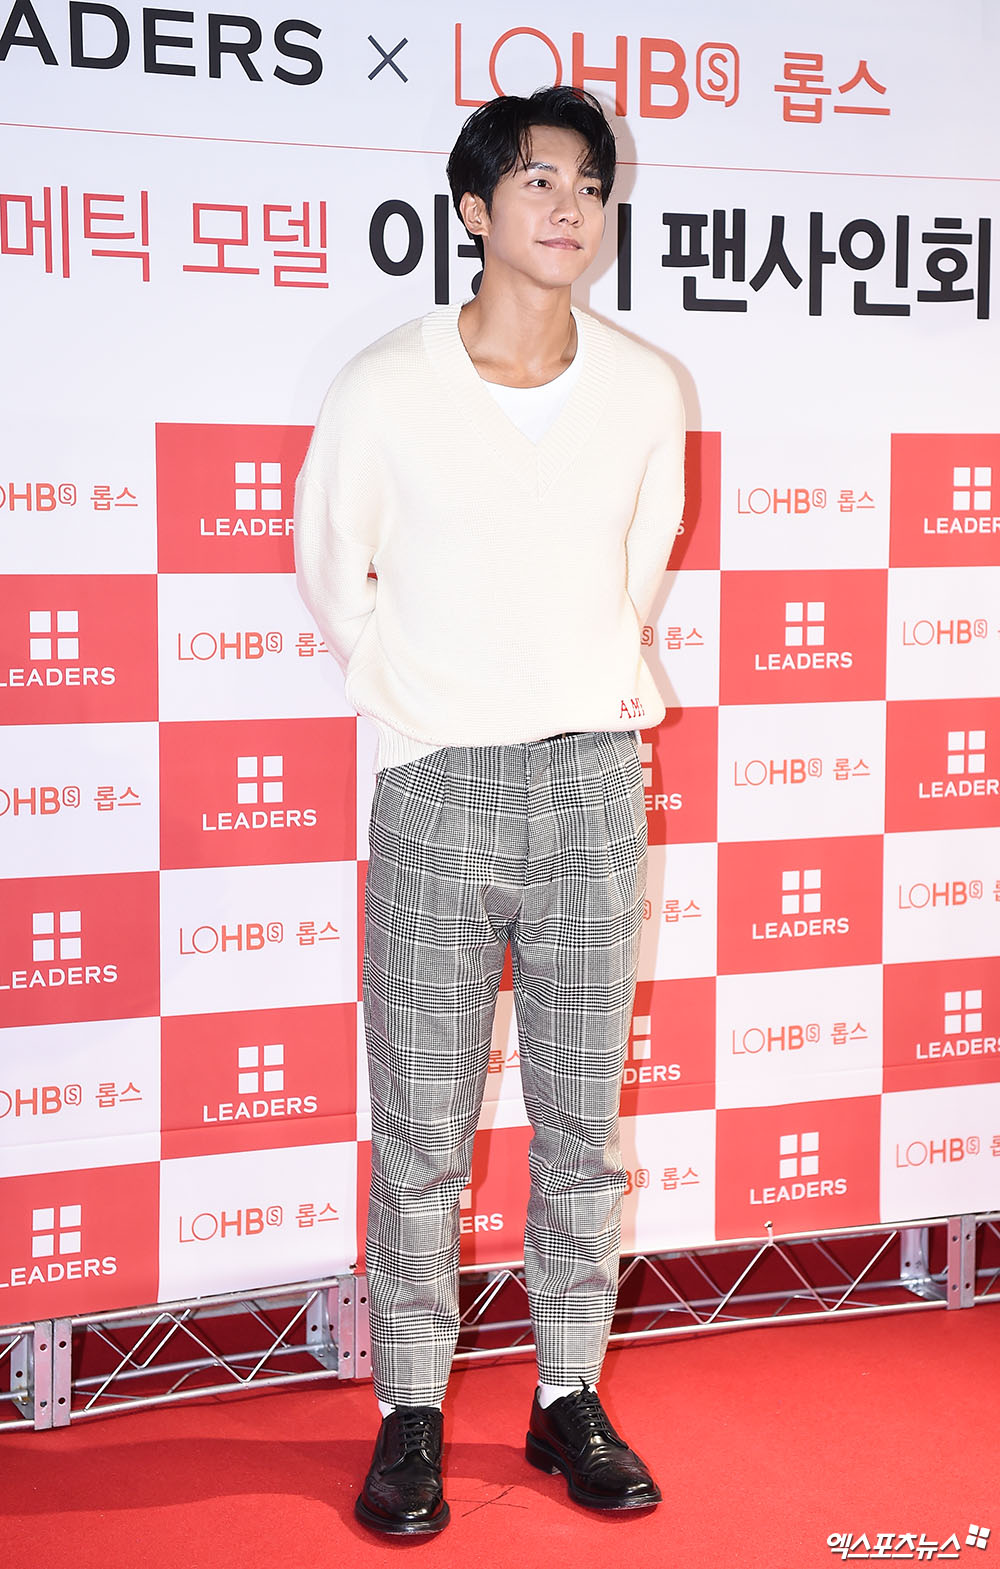 Actor Lee Seung-gi poses at a fan signing event of a more cosmetic brand held at the Itaewon LOHBs store in Seoul Yongsan District on the afternoon of the 26th.